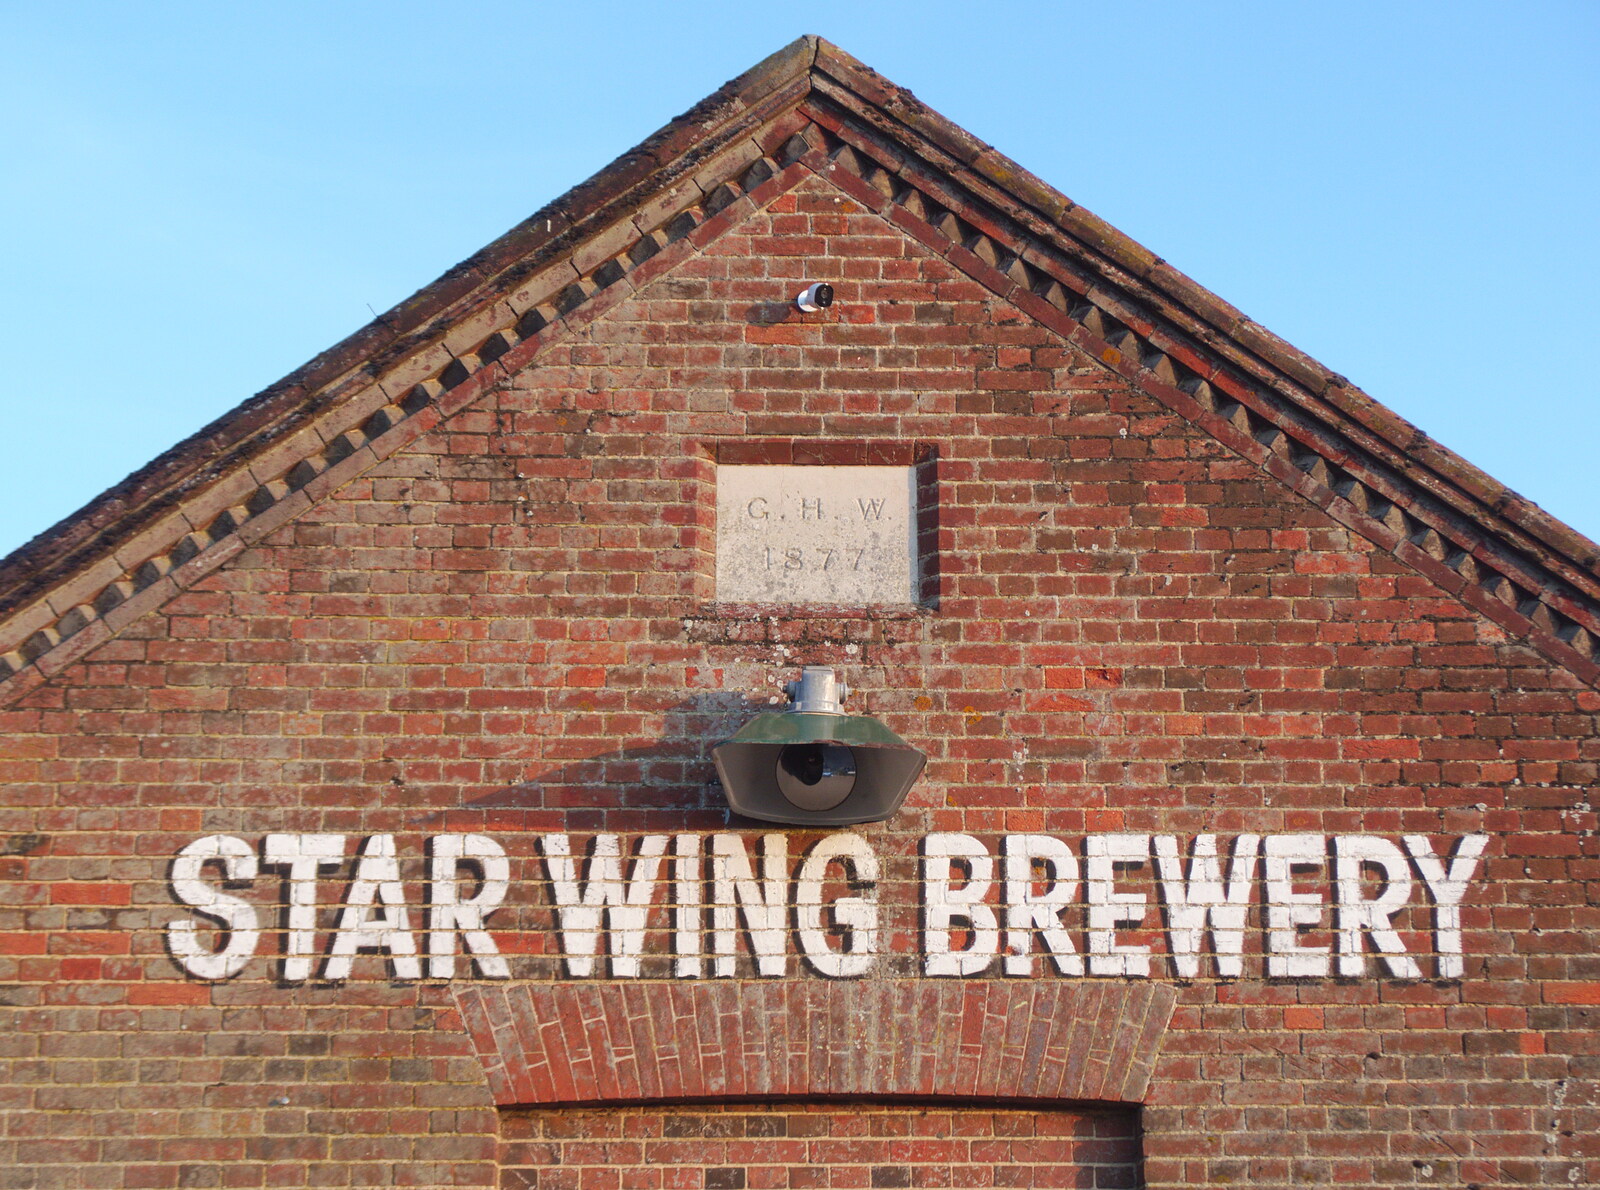 Star Wing sign on an 1877 building from Up on the Roof: a Hydroponic City Farm, Kingdom Street, Paddington - 3rd September 2019